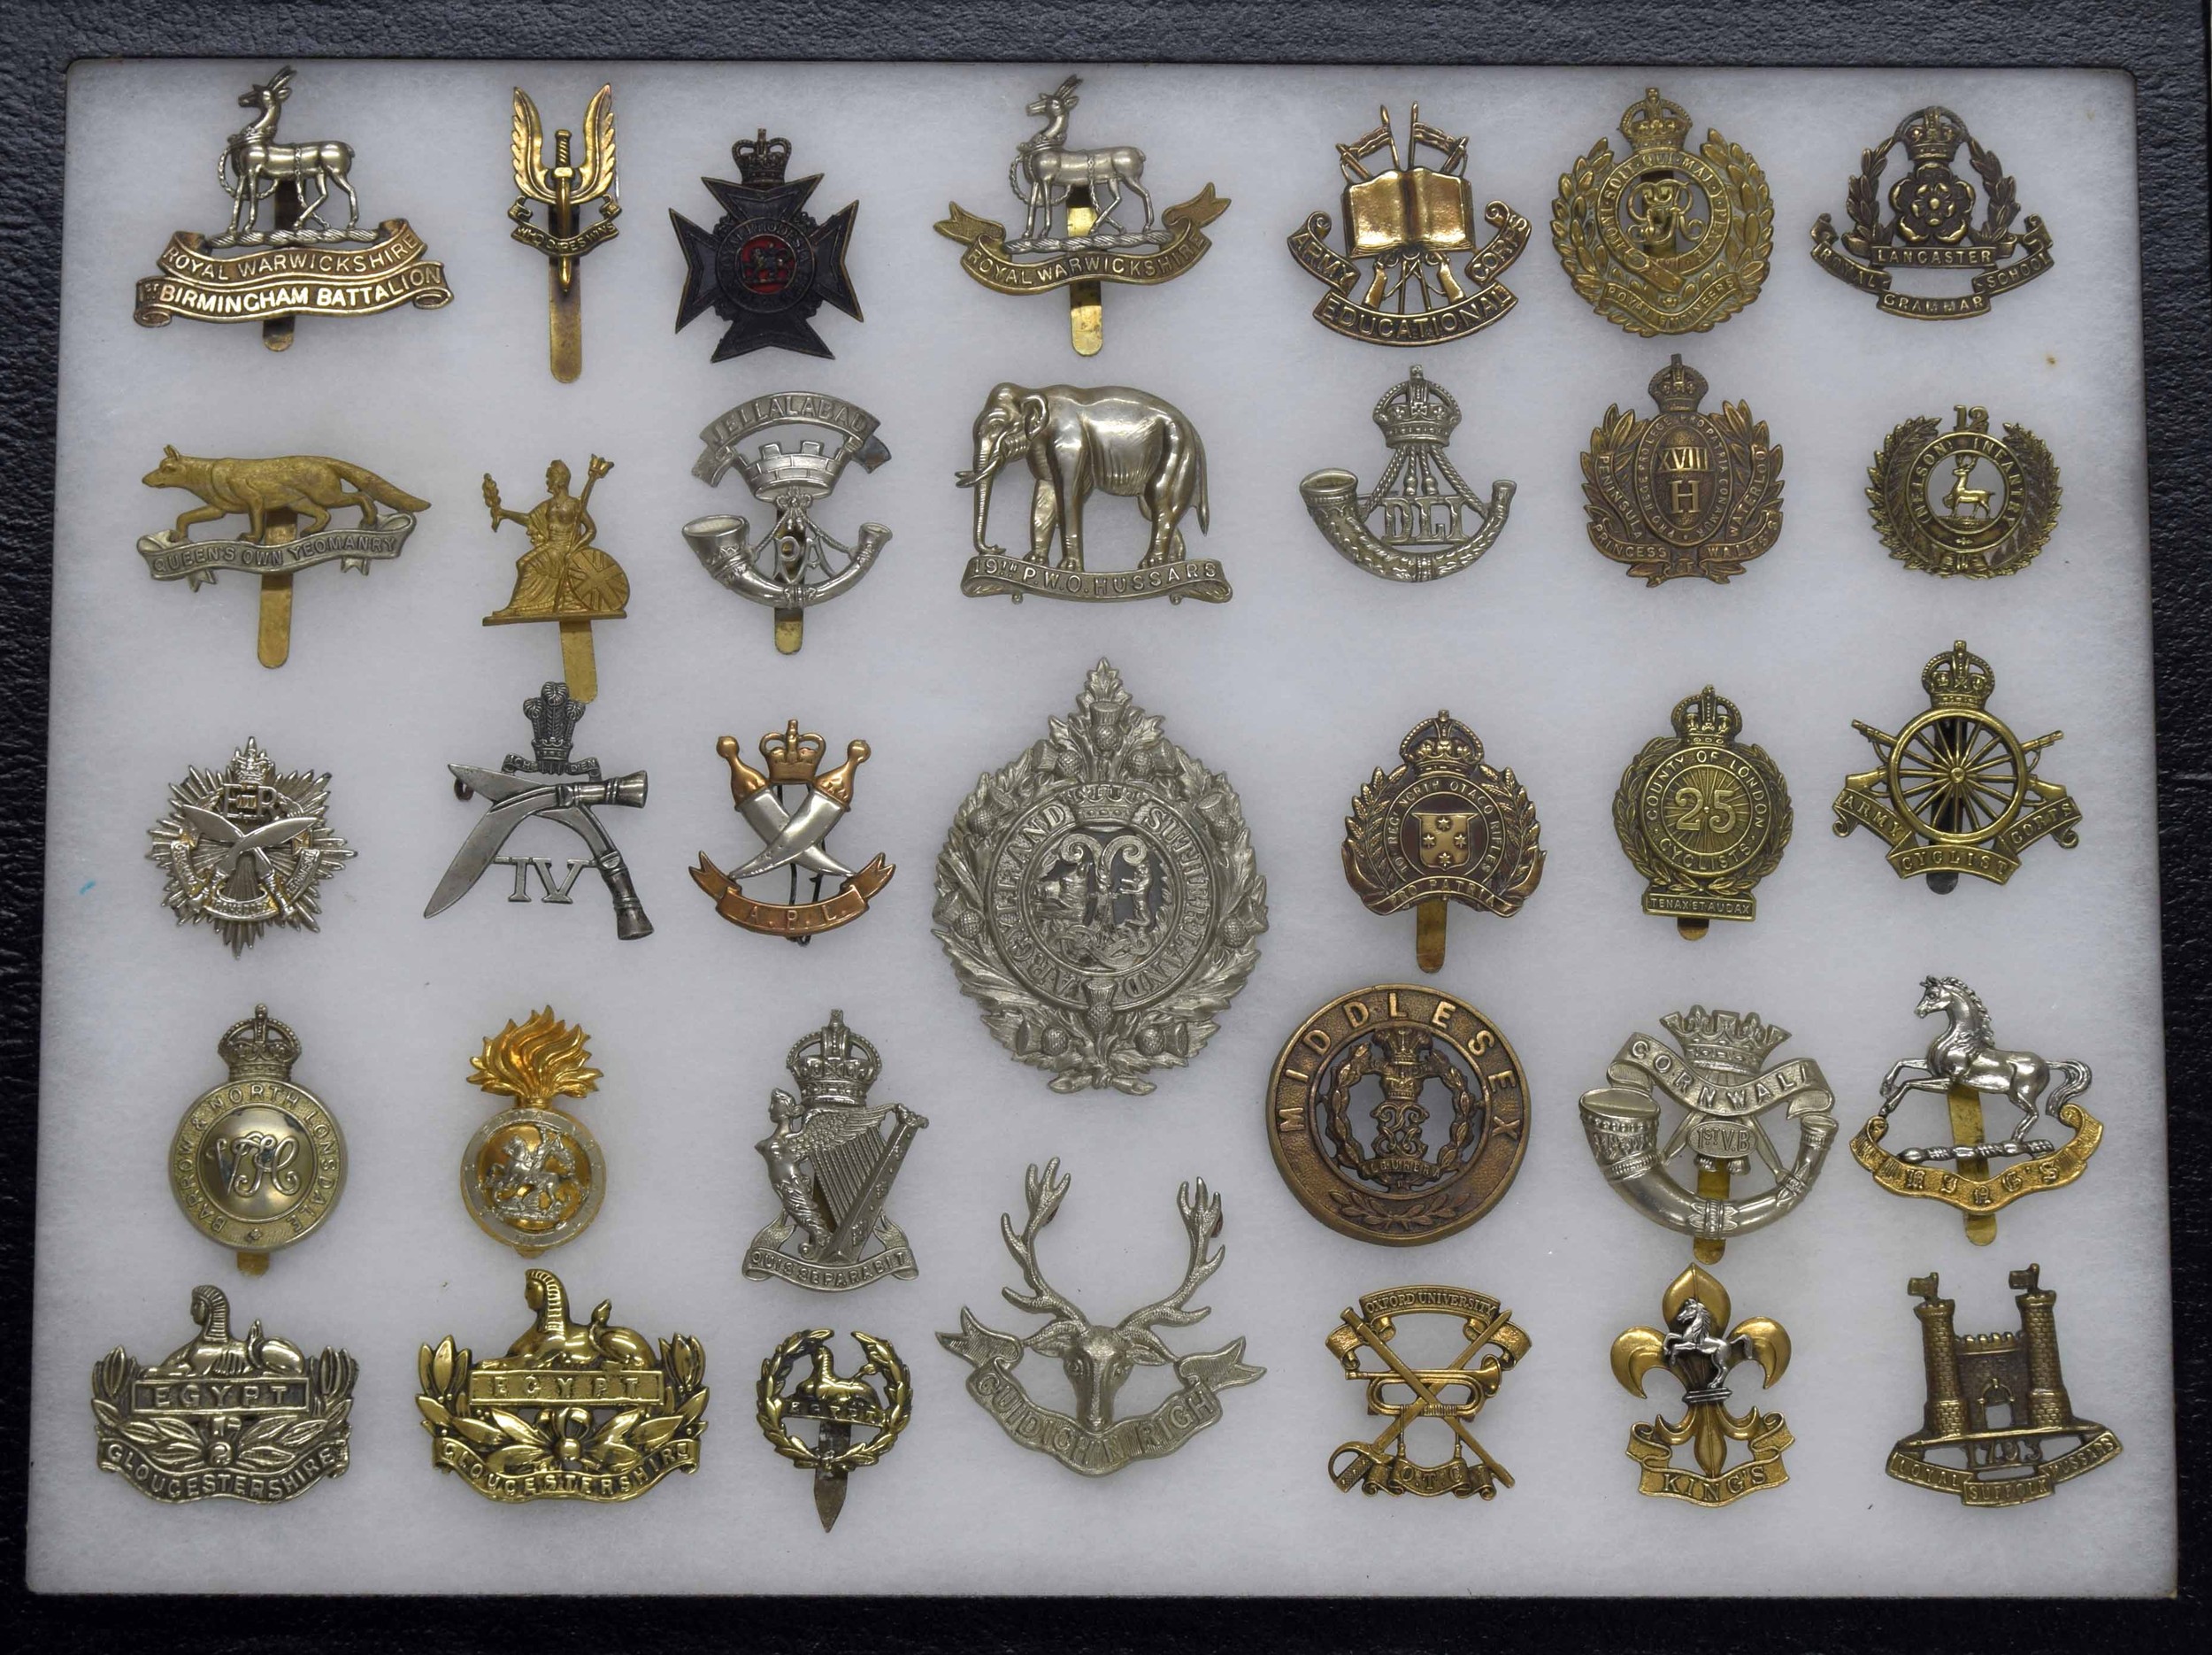 Military Regimental cap badges - collection of thirty-four examples mounted in a display frame, 16.